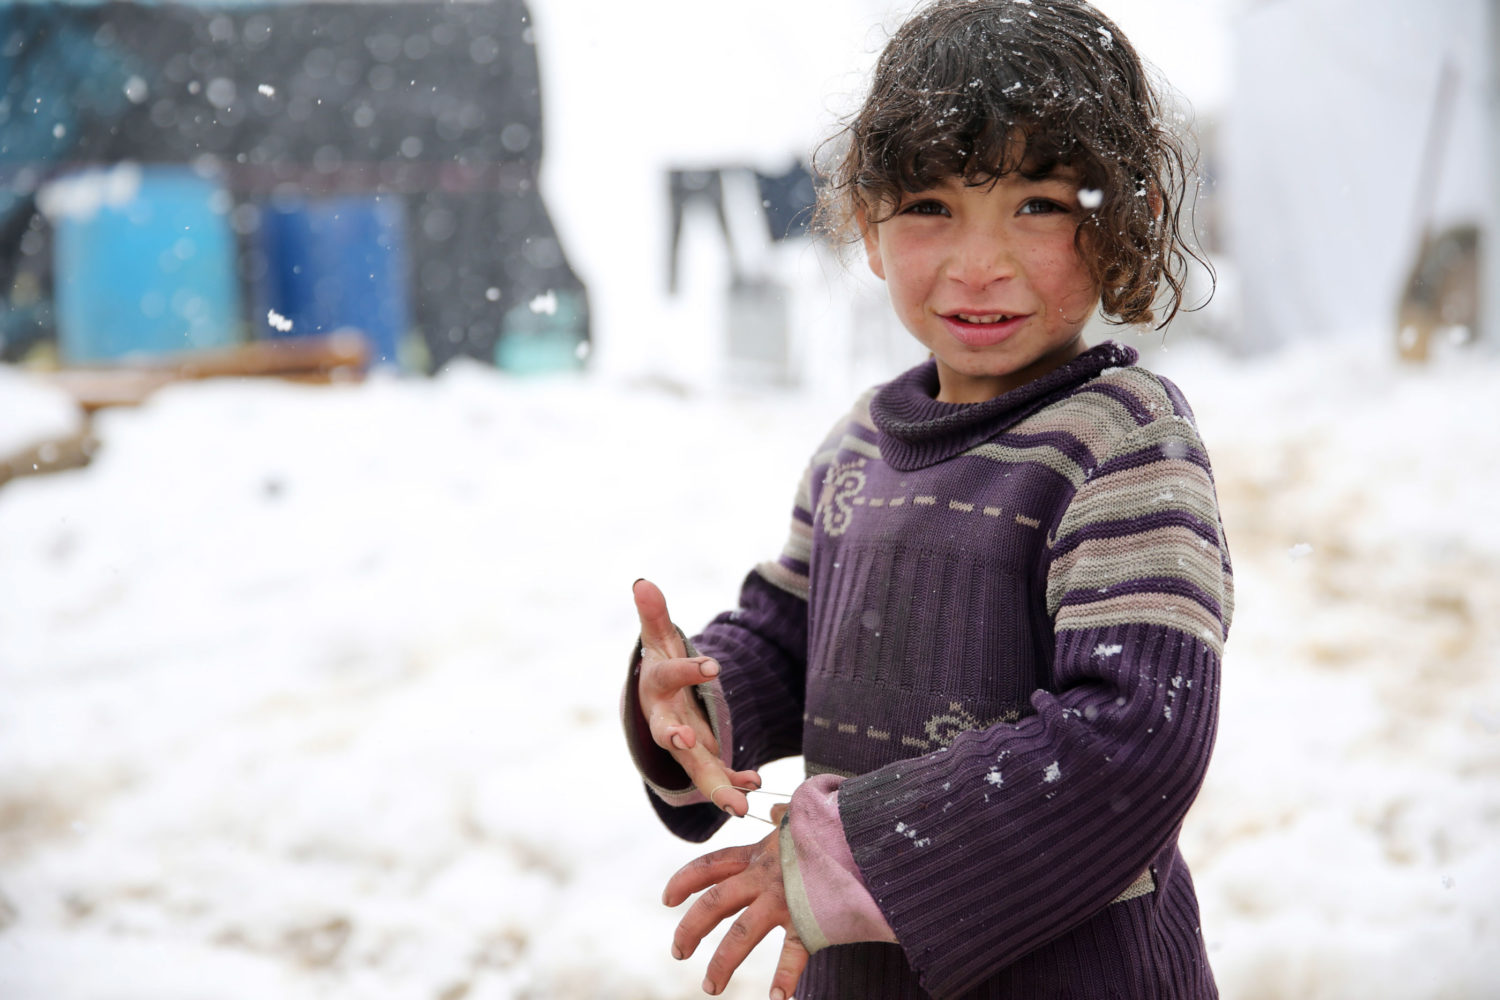 Donate today and help us keep the children of Syria safe and warm.